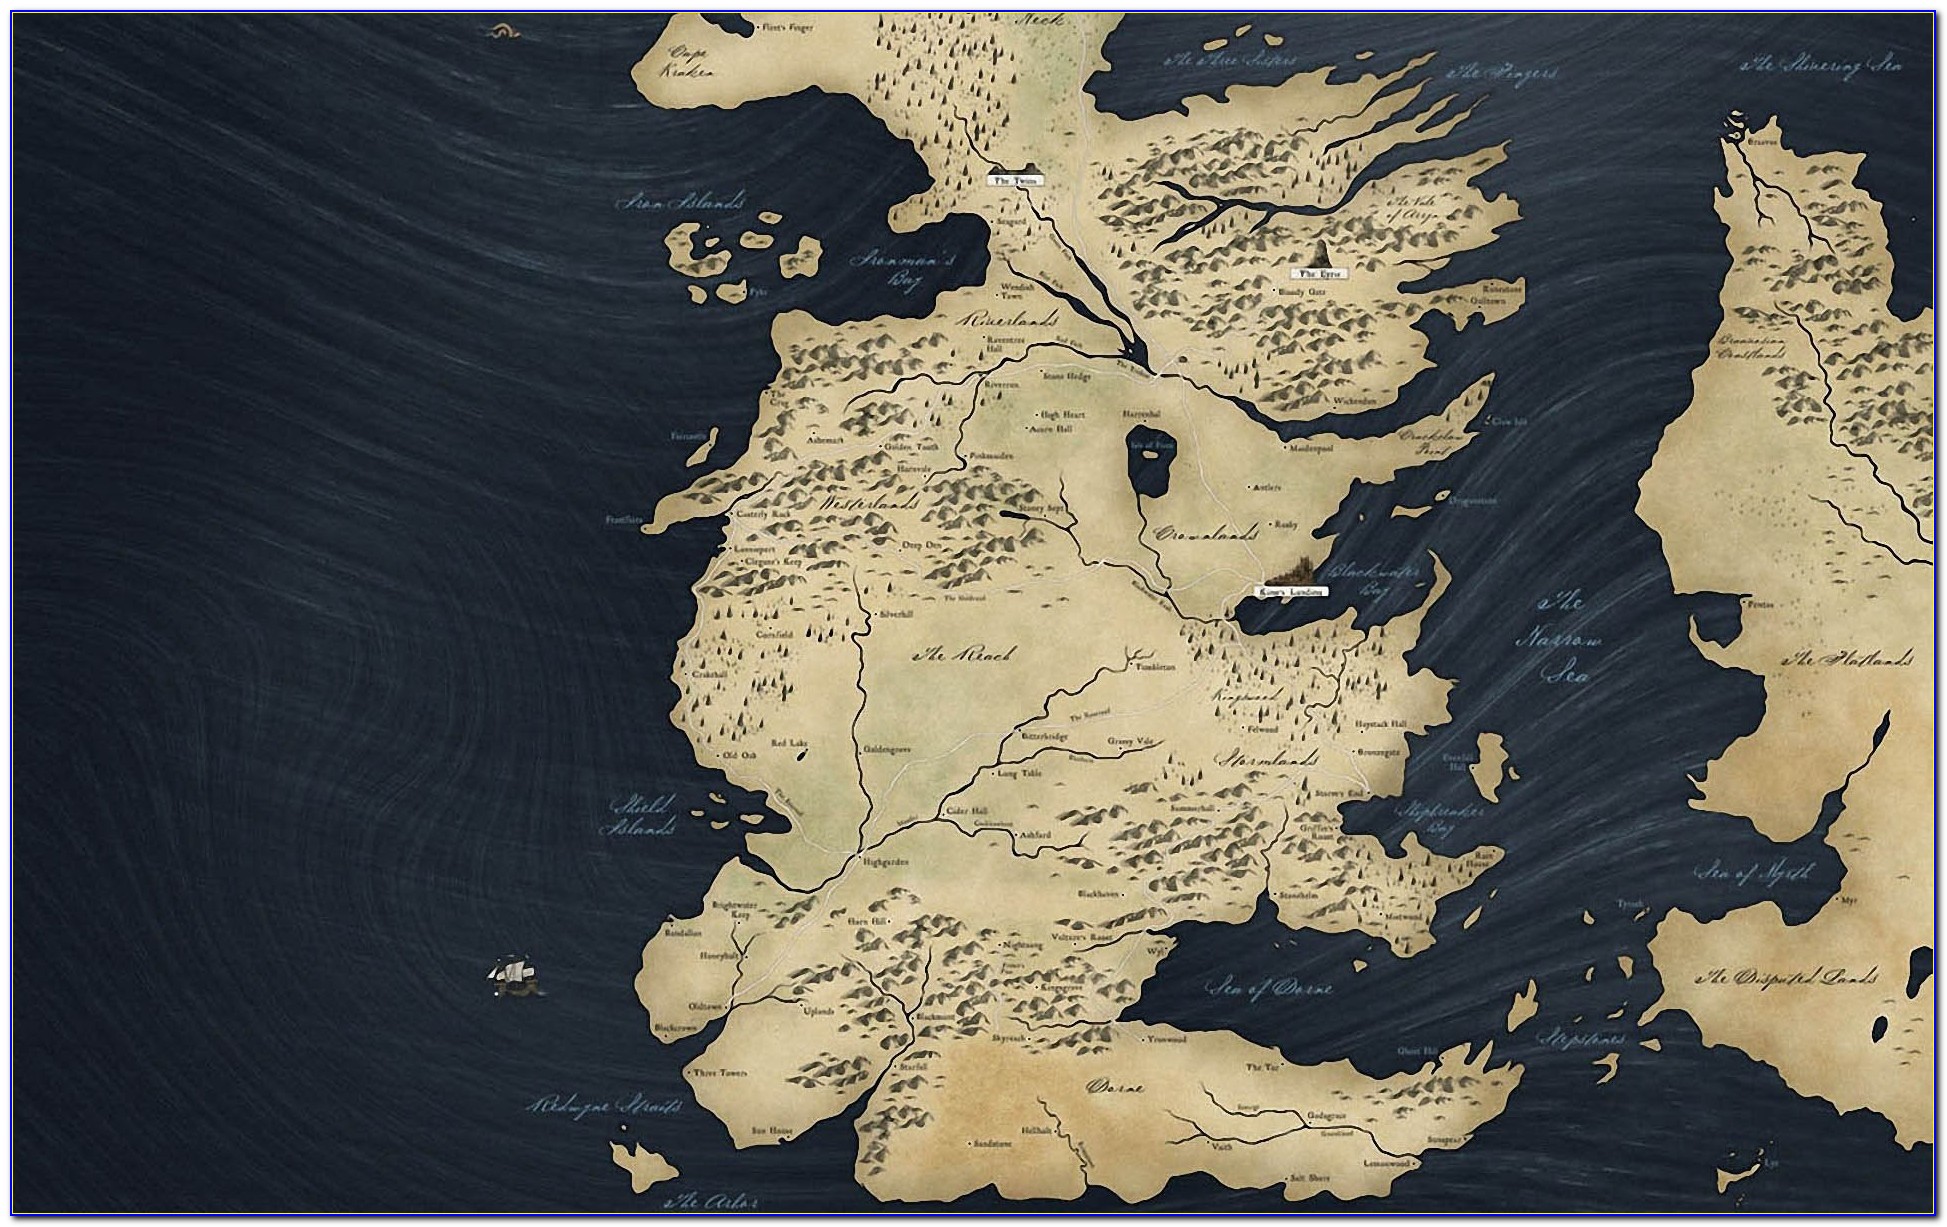 Game Of Thrones Wall Map